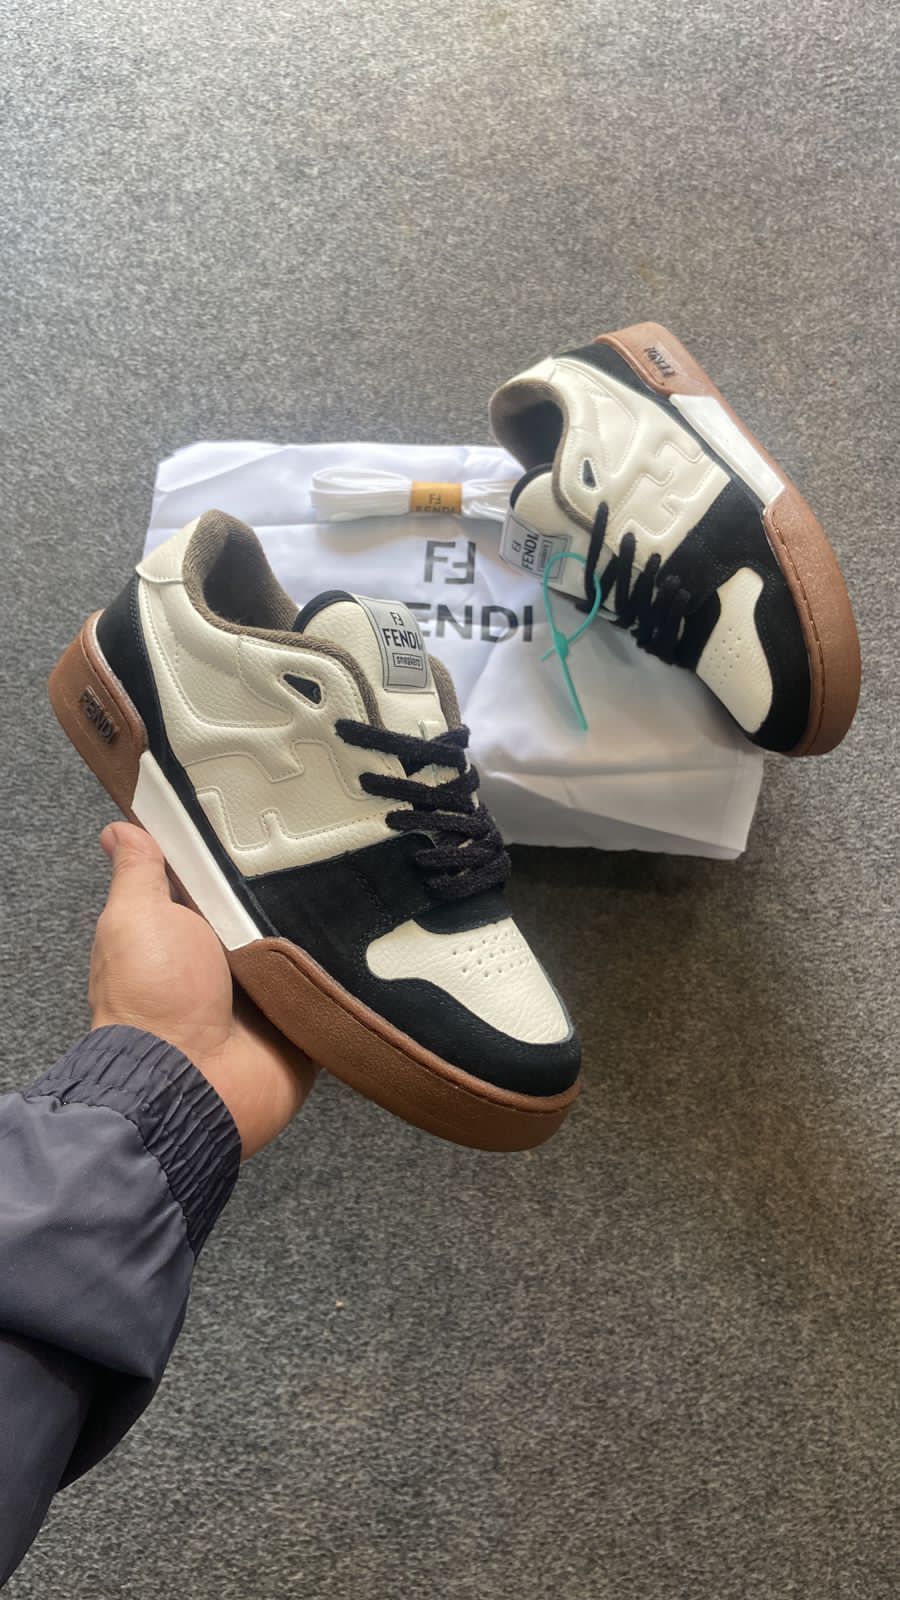 Imported Fendi Sneakers 4 Colors